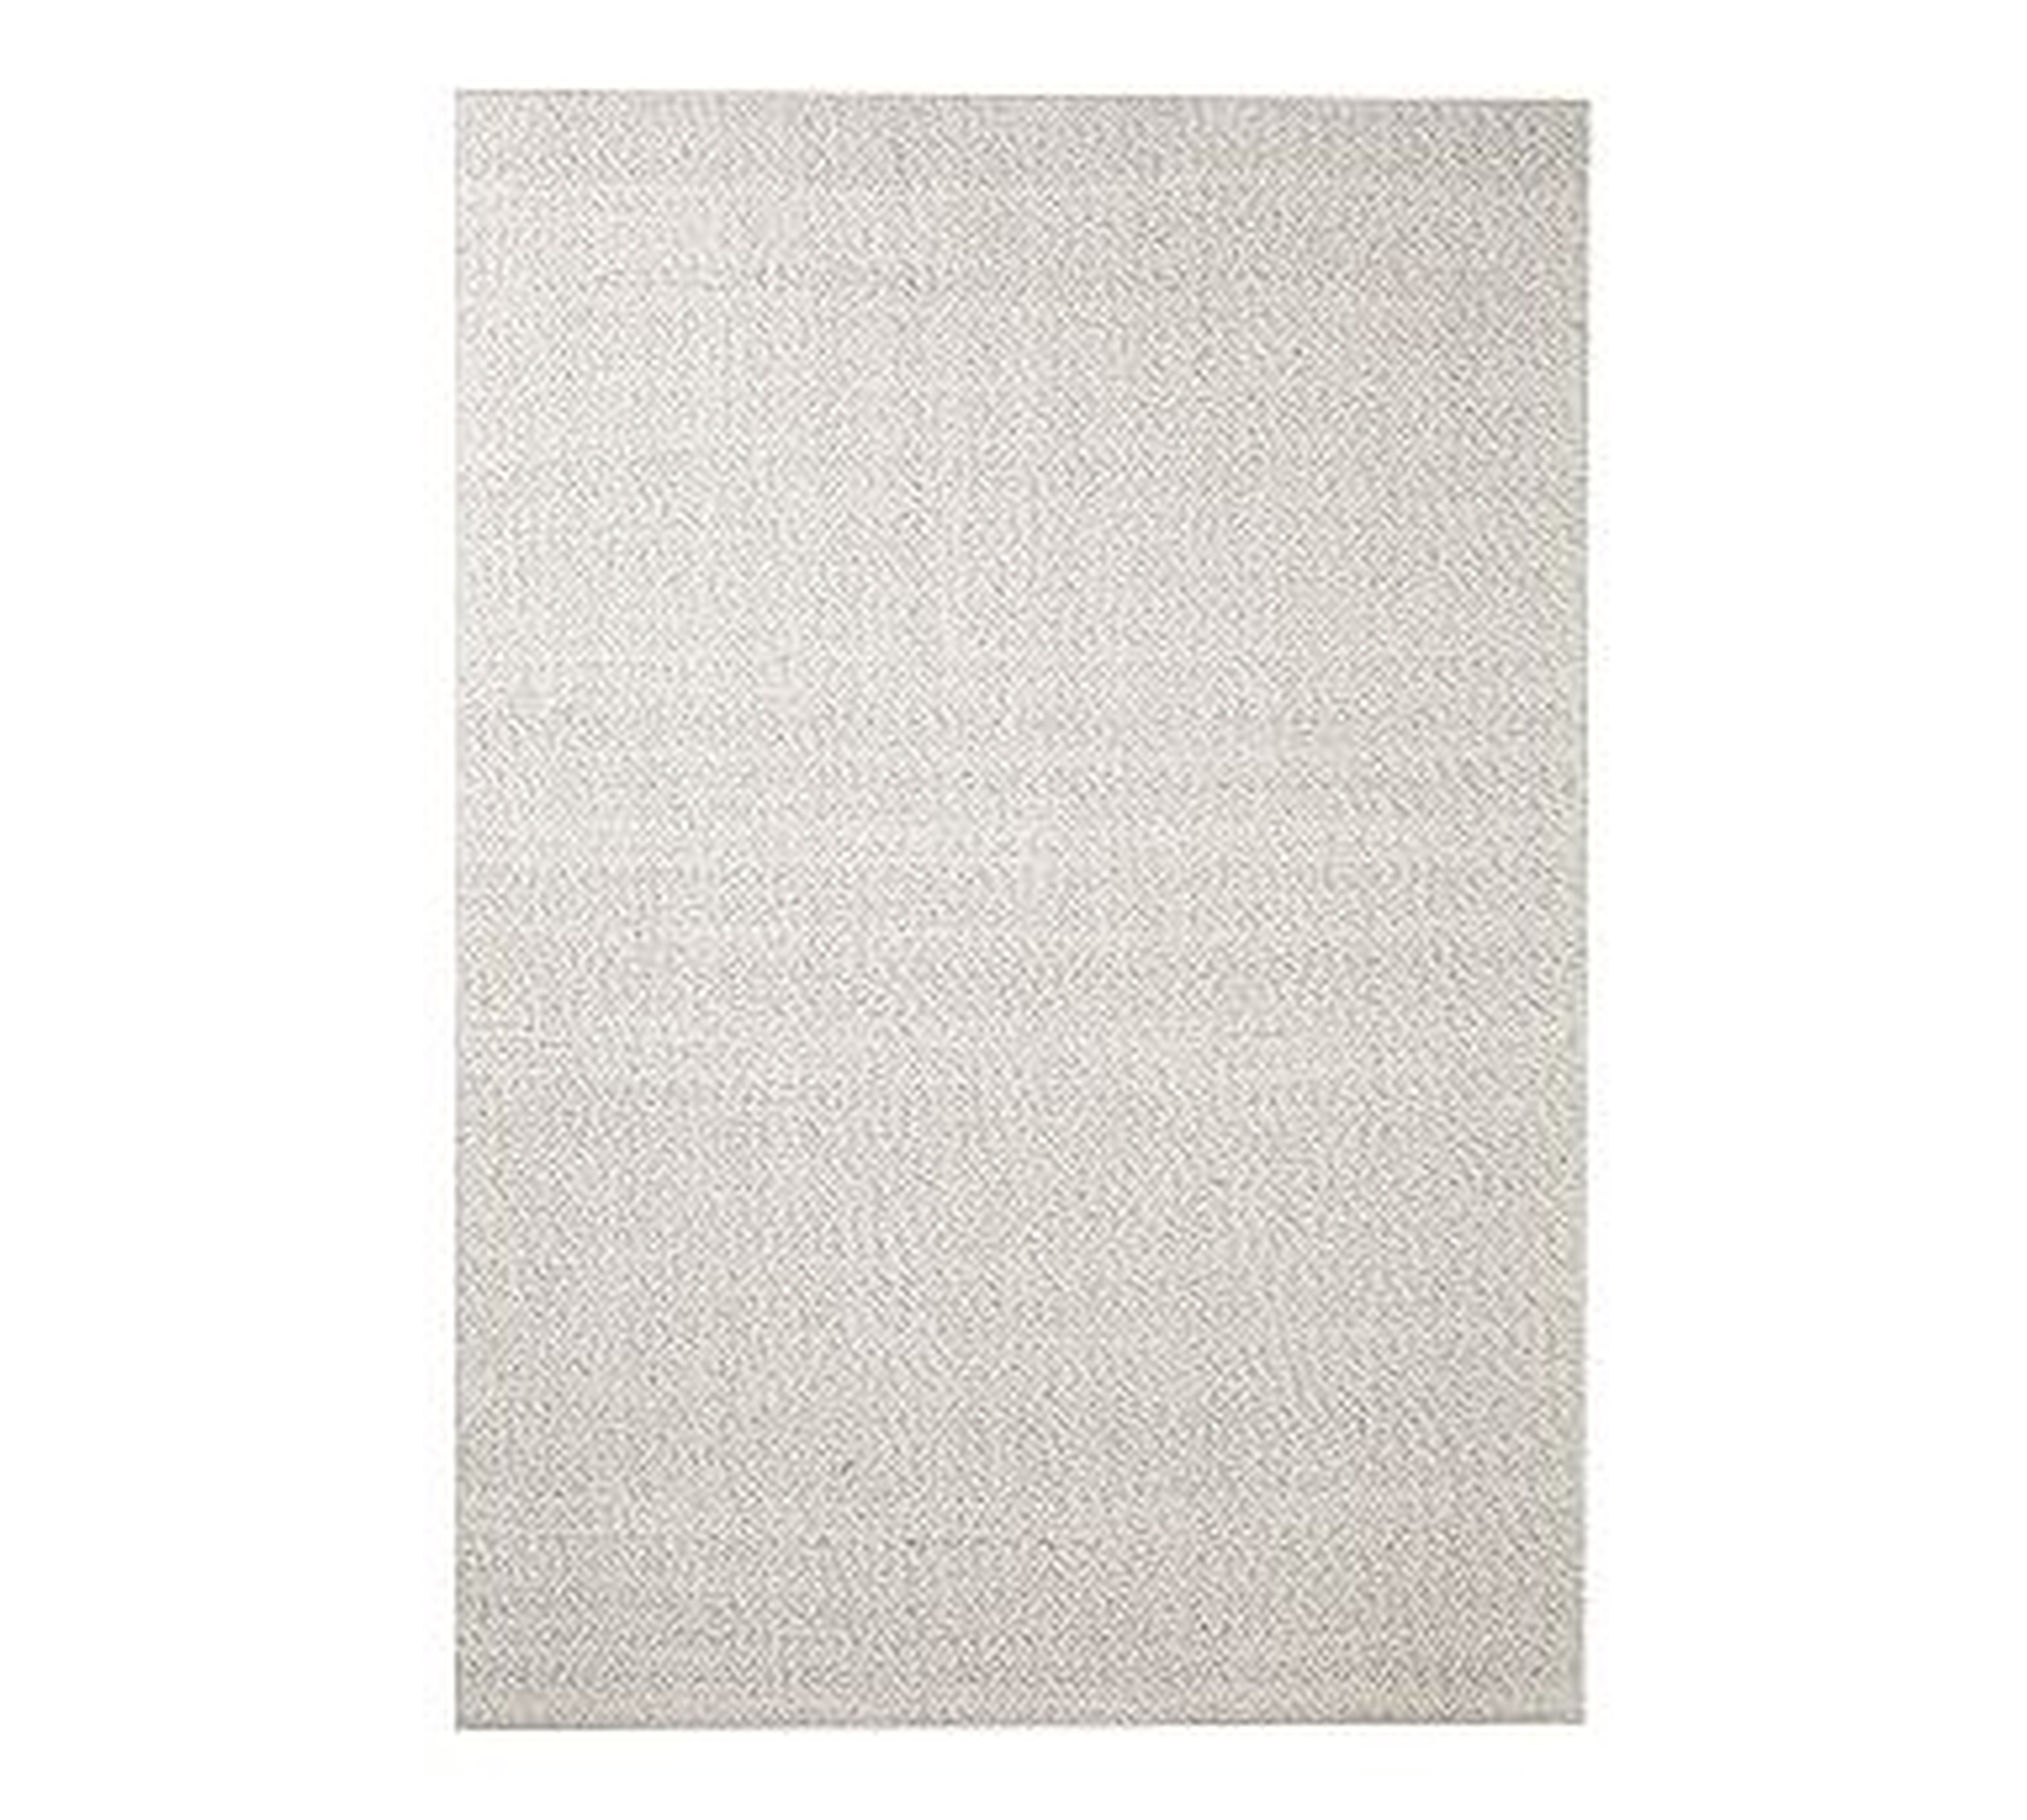 Lucca Synthetic Rug, 5 x 8', Gray Multi - Pottery Barn